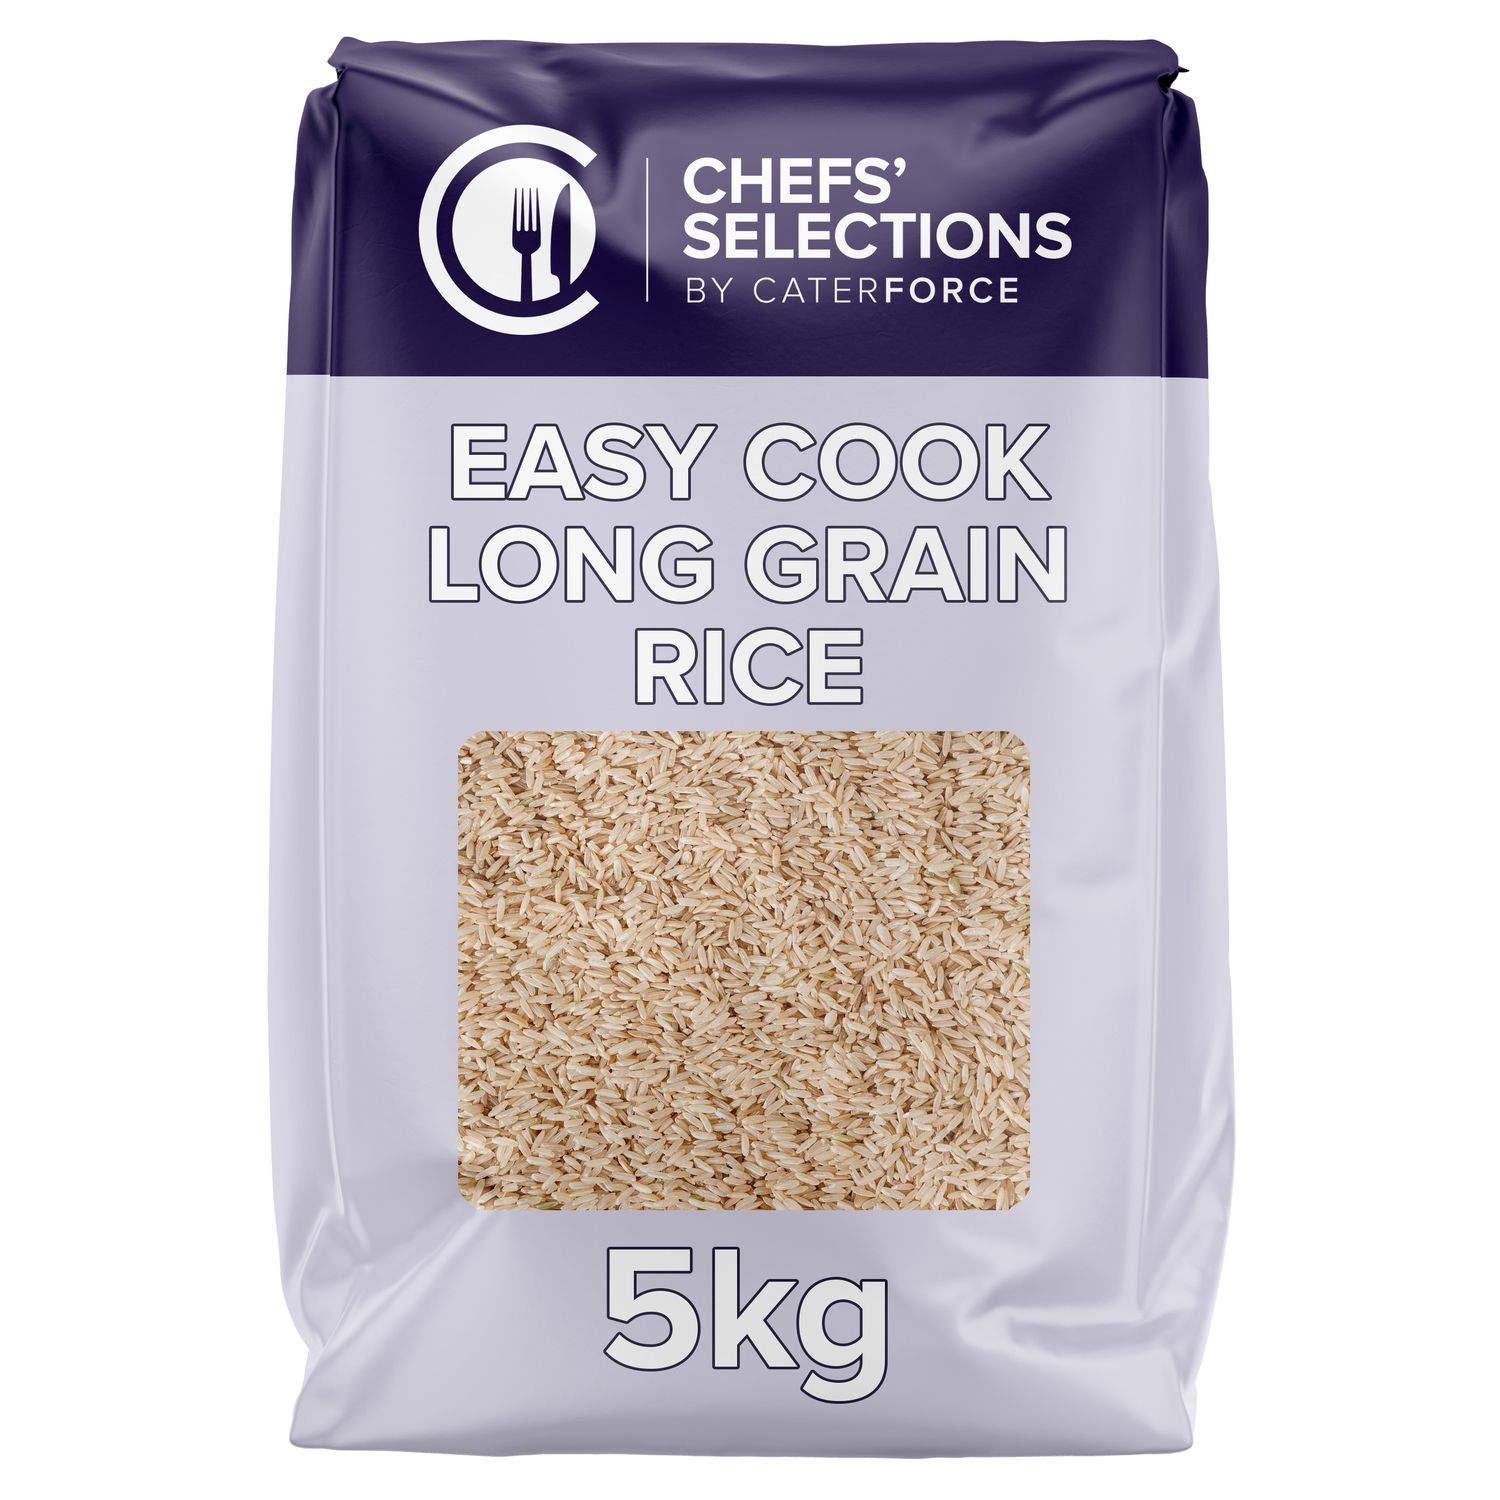 Chefs’ Selections Easy Cook Long Grain Rice (1 x 5kg)